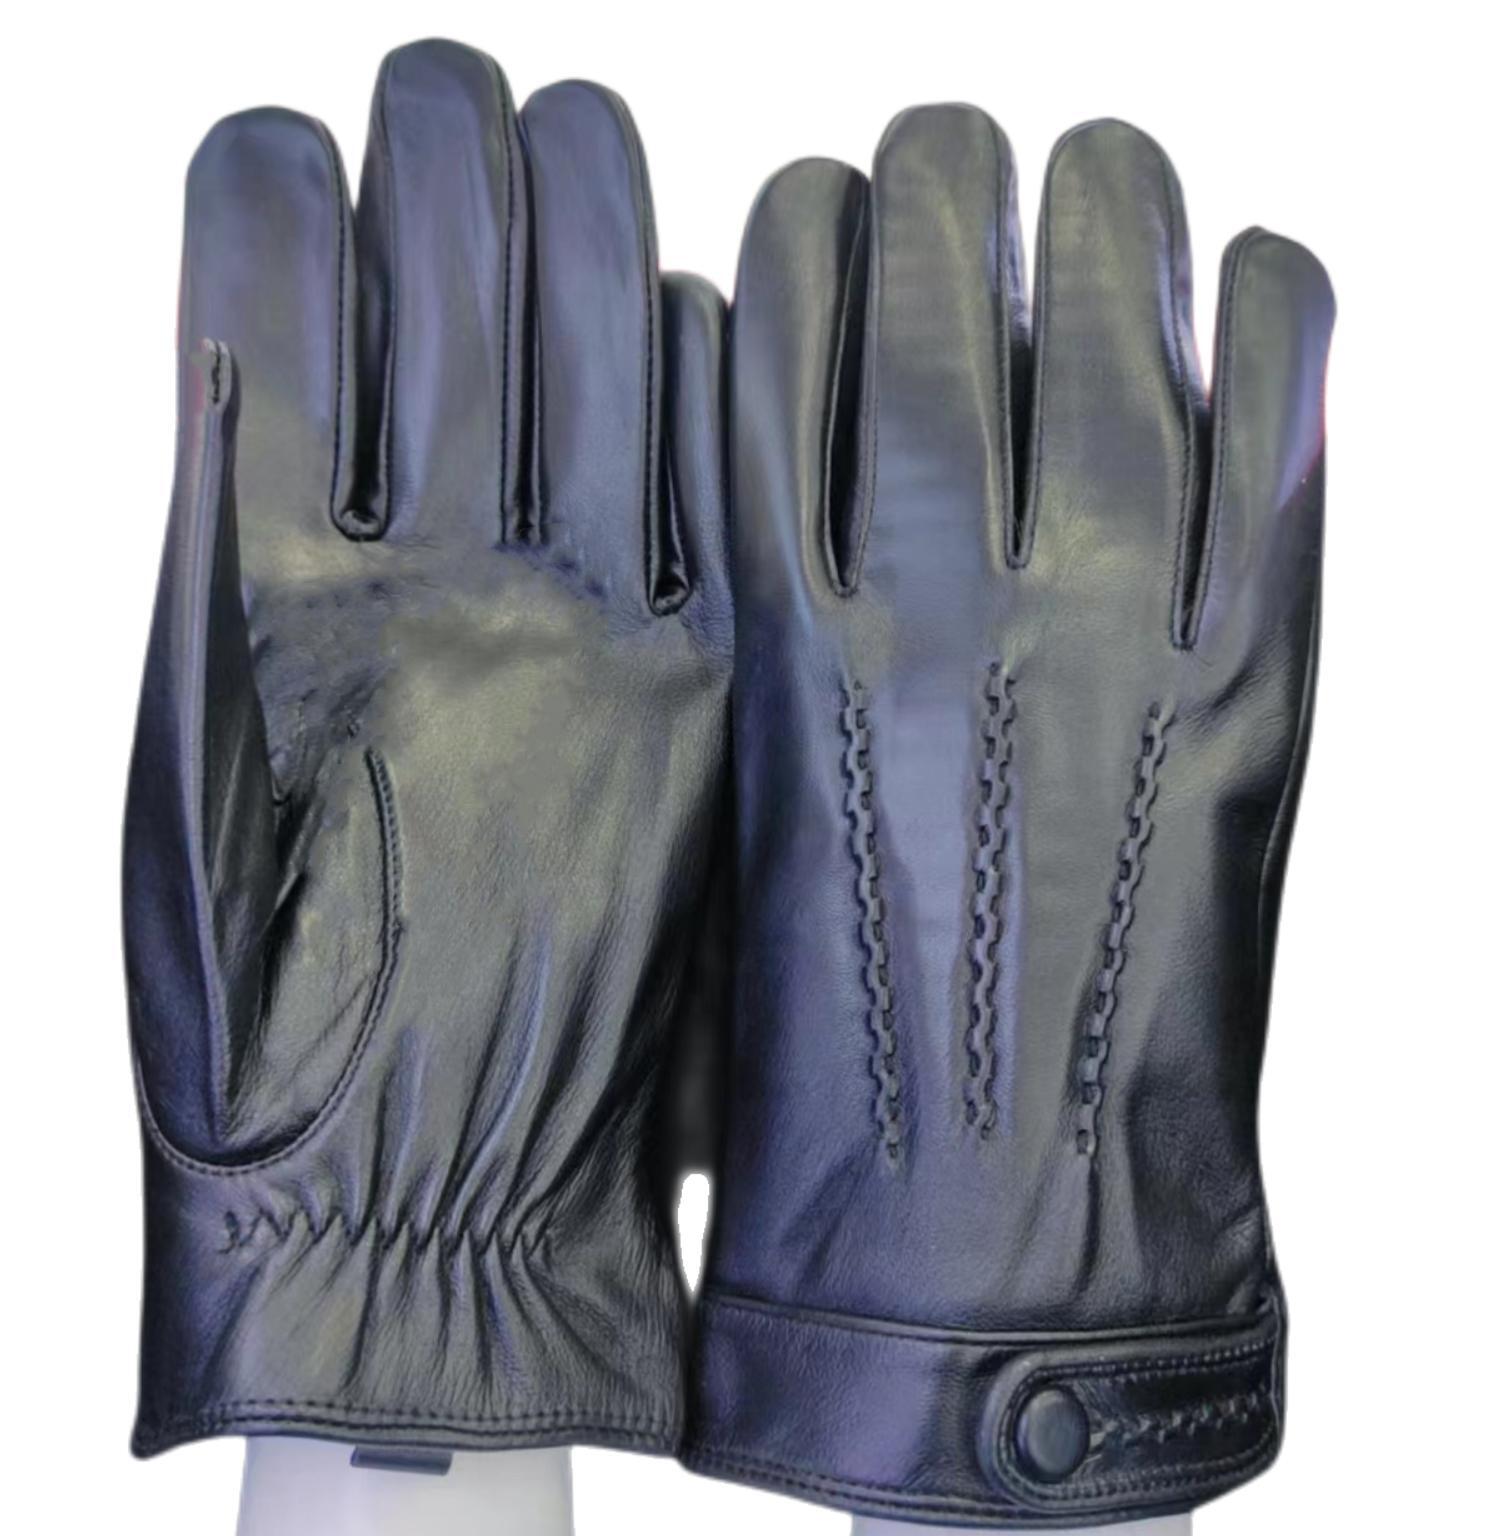 

Sheepskin gloves with velvet lining for warmth men and women can wear simple style without any accessories Available in black